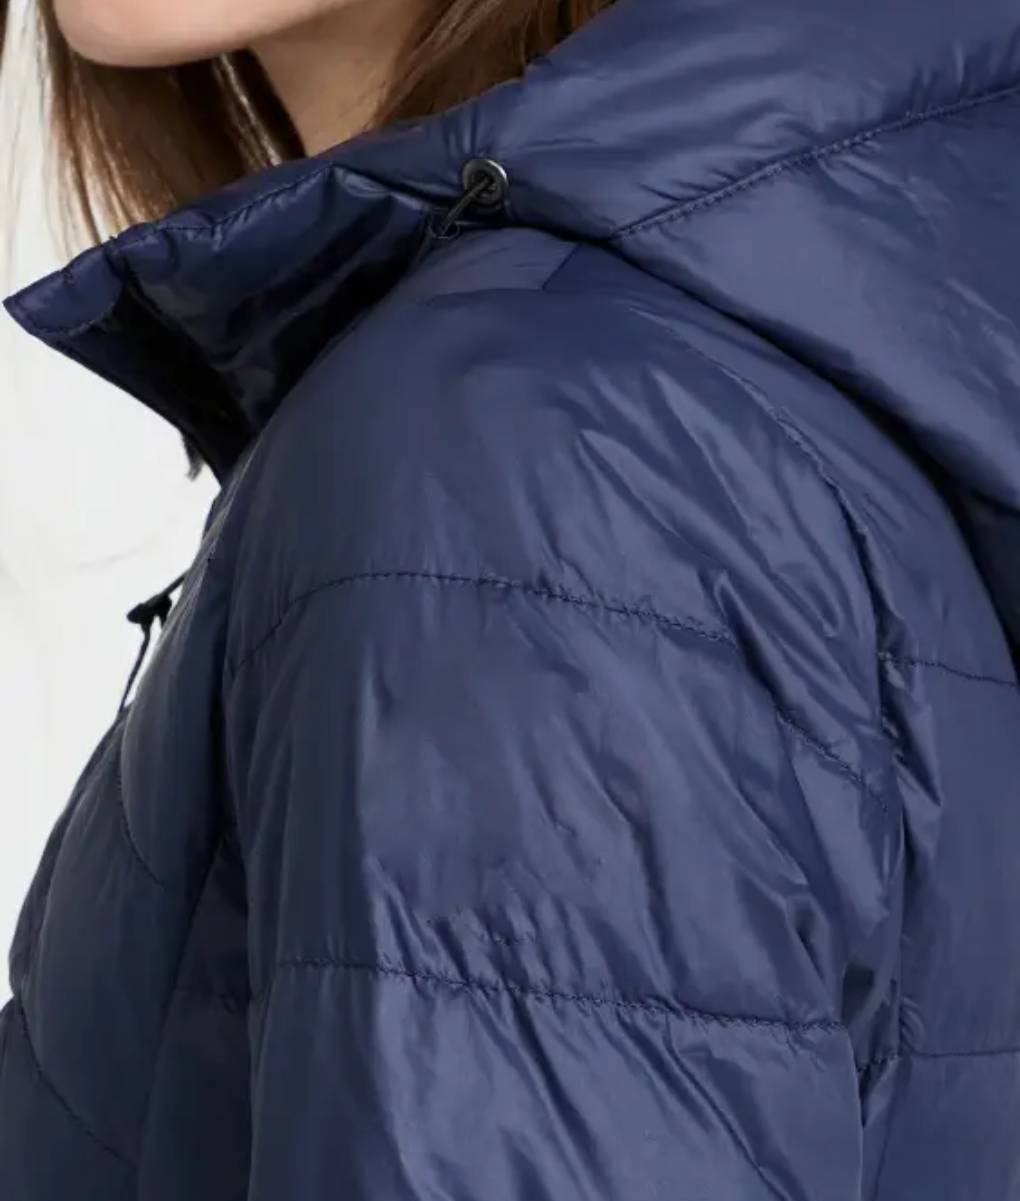 Josephine The Other Zoey Blue Puffer Jacket (6)